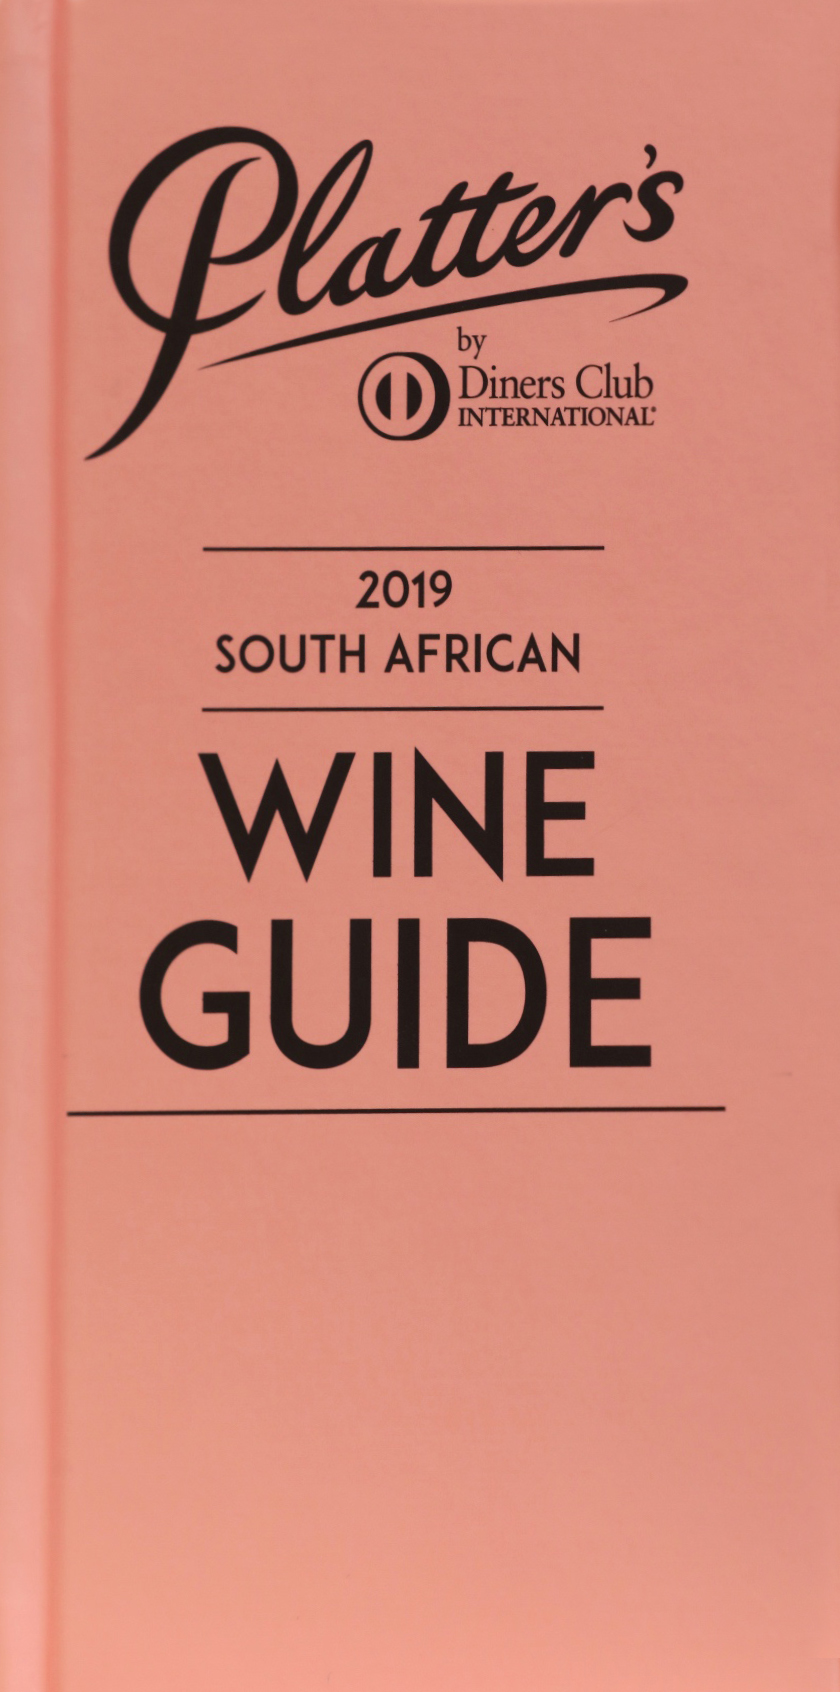 Platter’s South African Wine Guide 2019